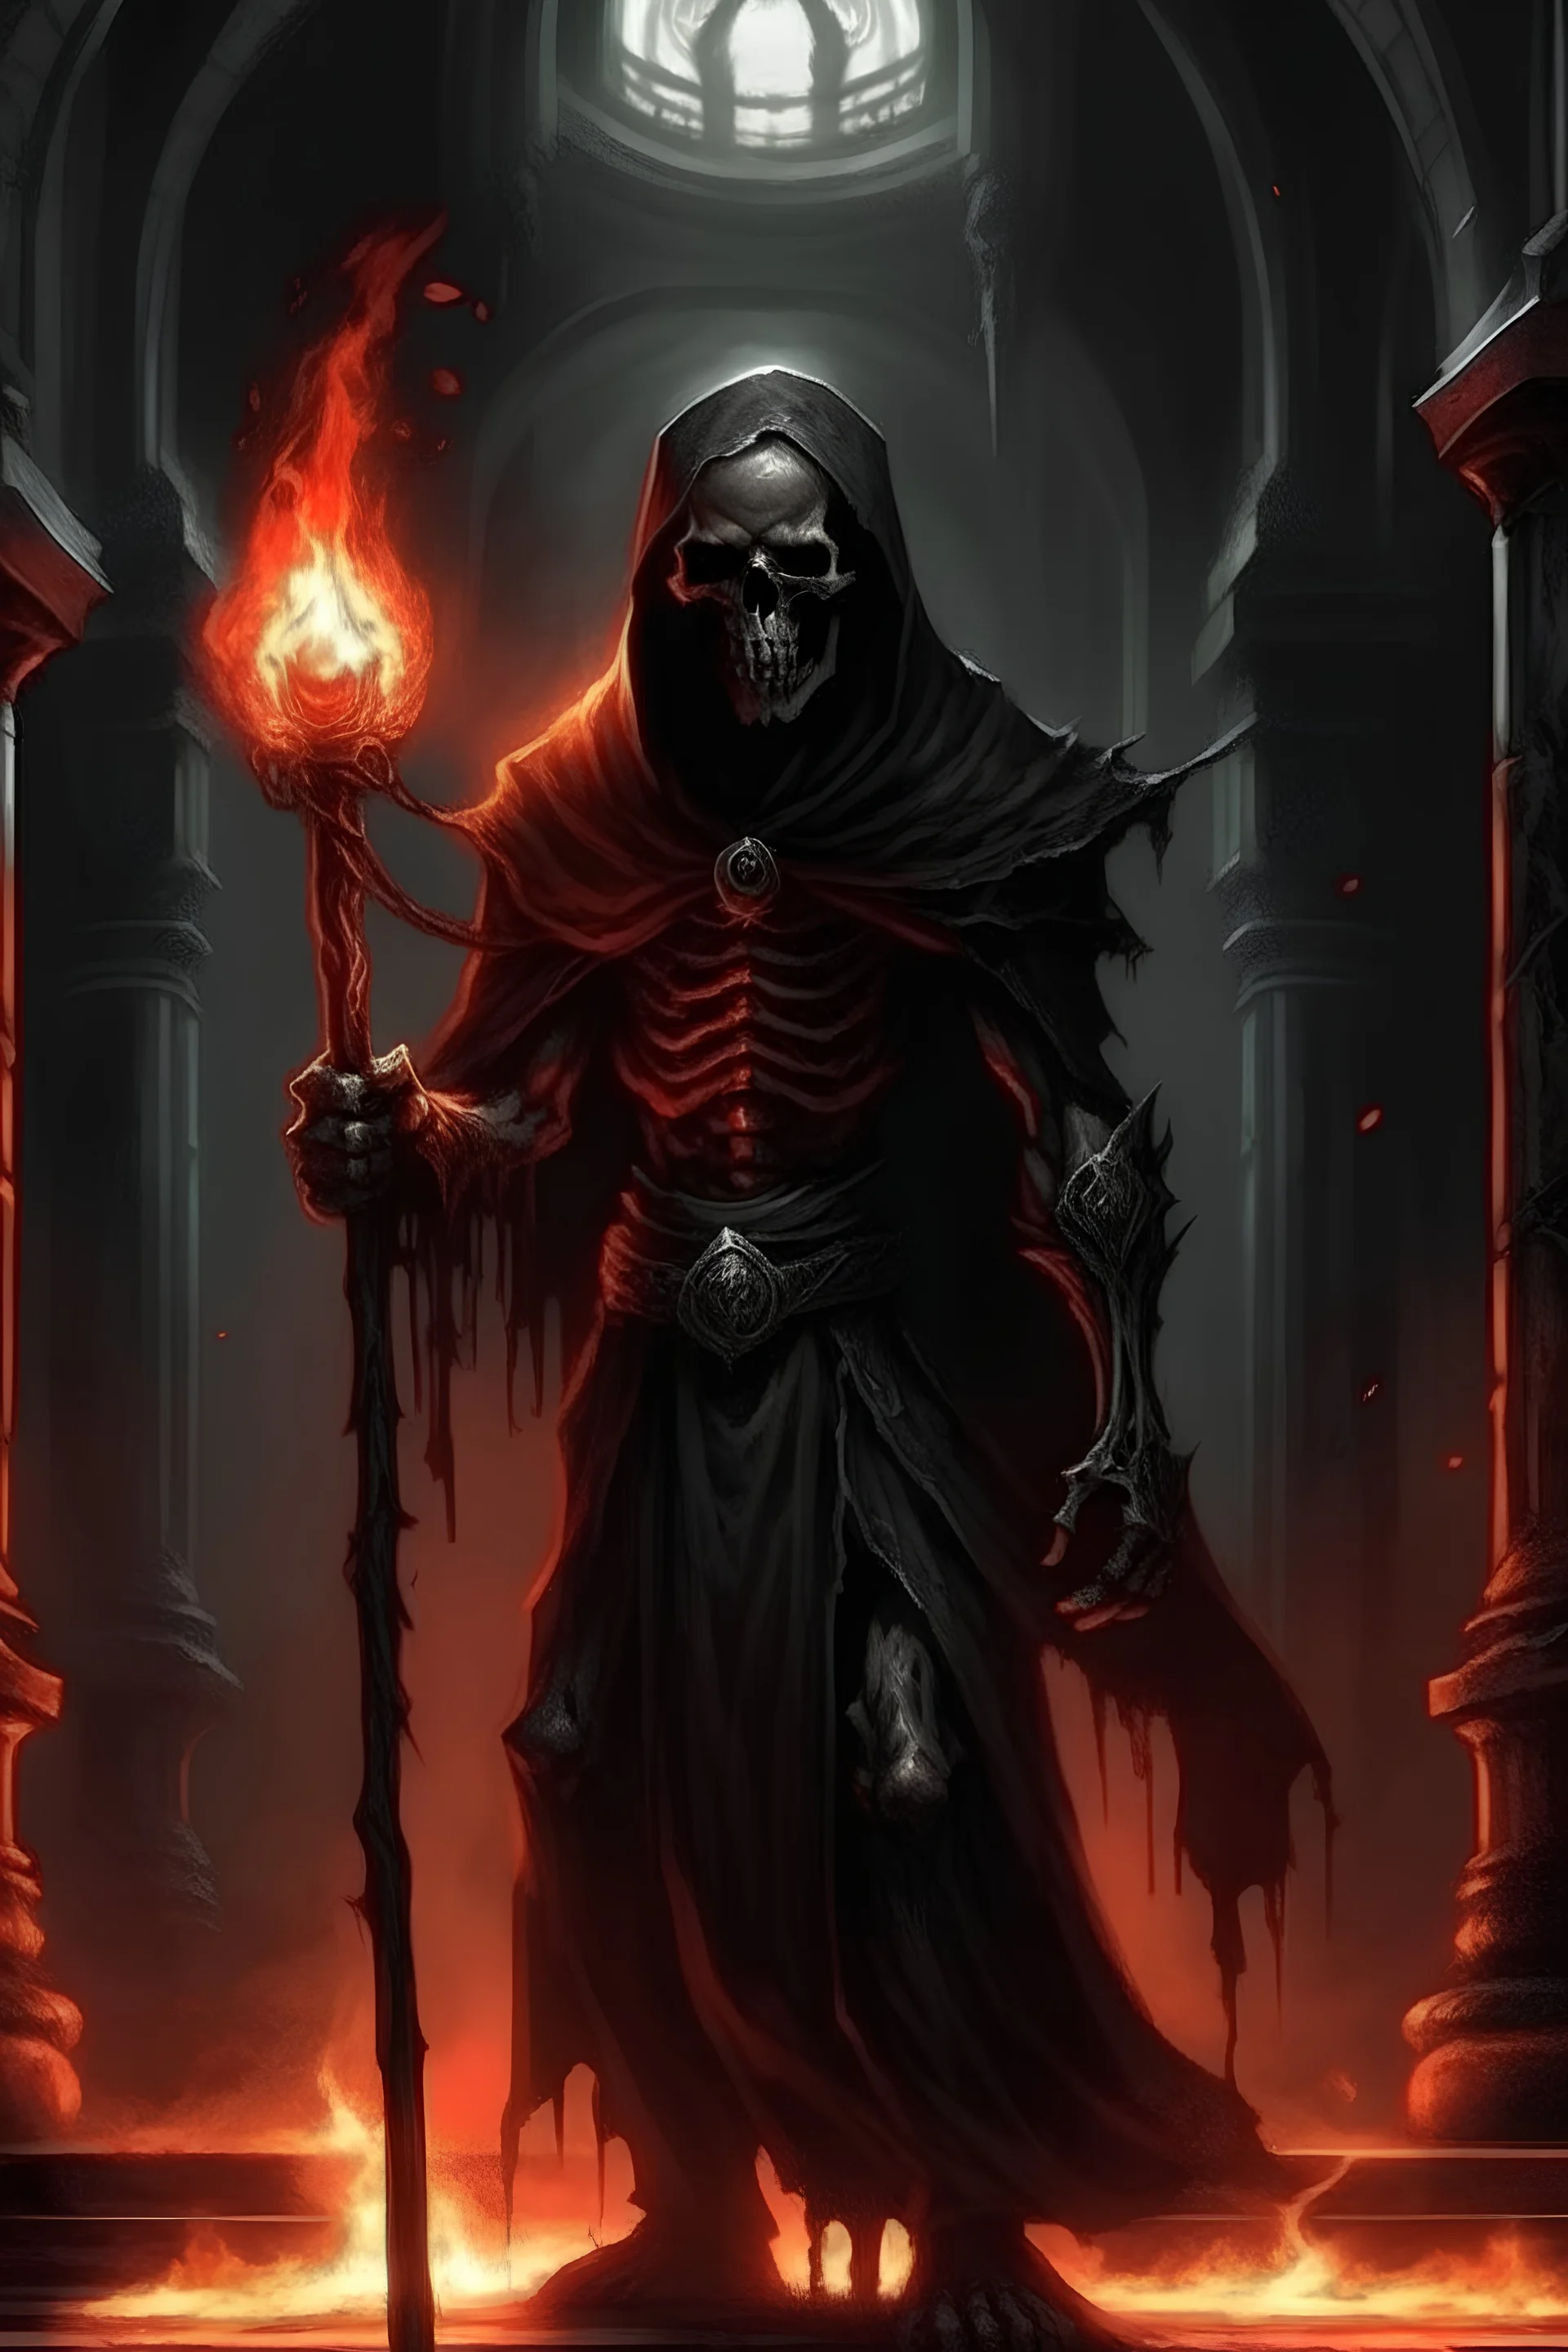 a god of death with red eyes and his head as a skull with a black hood wealdig a spear with fire as his wepon in a big room made of black stone brikcks